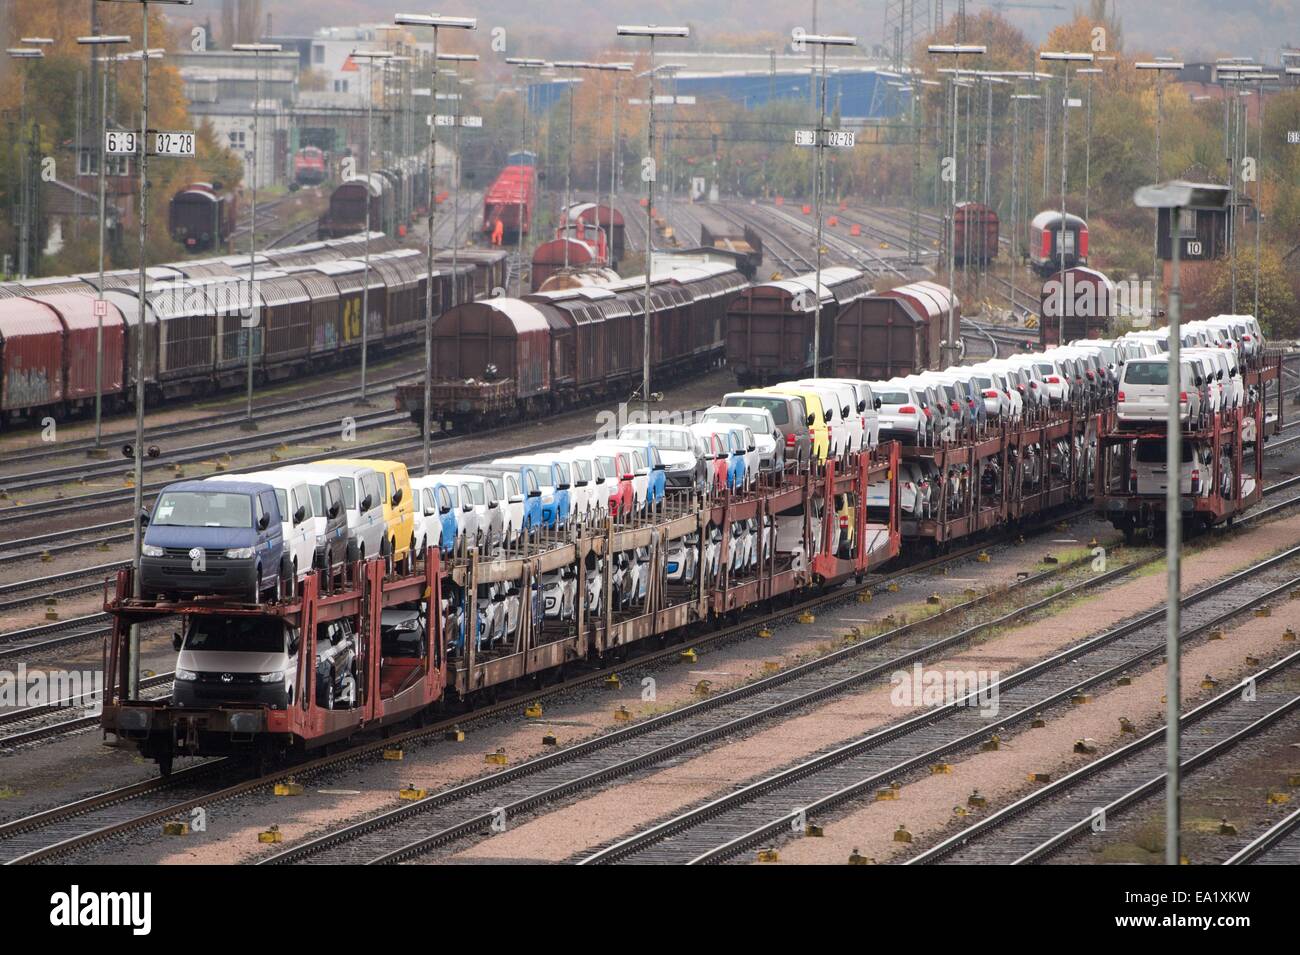 Kornwestheim, Germany. 05th Nov, 2014. Freight trains stand at the freight yard in Kornwestheim, Germany, 05 November 2014. Germany's Deutsche Bahn is considering launching legal action against train drivers' union GDL as the railway company braces itself for the longest strike in its 20-year history. The strike announcement on 04 November triggered condemnation from both business and political leaders. Strike actions are planned to last from Wednesday 5 November to Monday 10 November 2014. Photo: Sebastian Kahneret/dpa/Alamy Live News Stock Photo